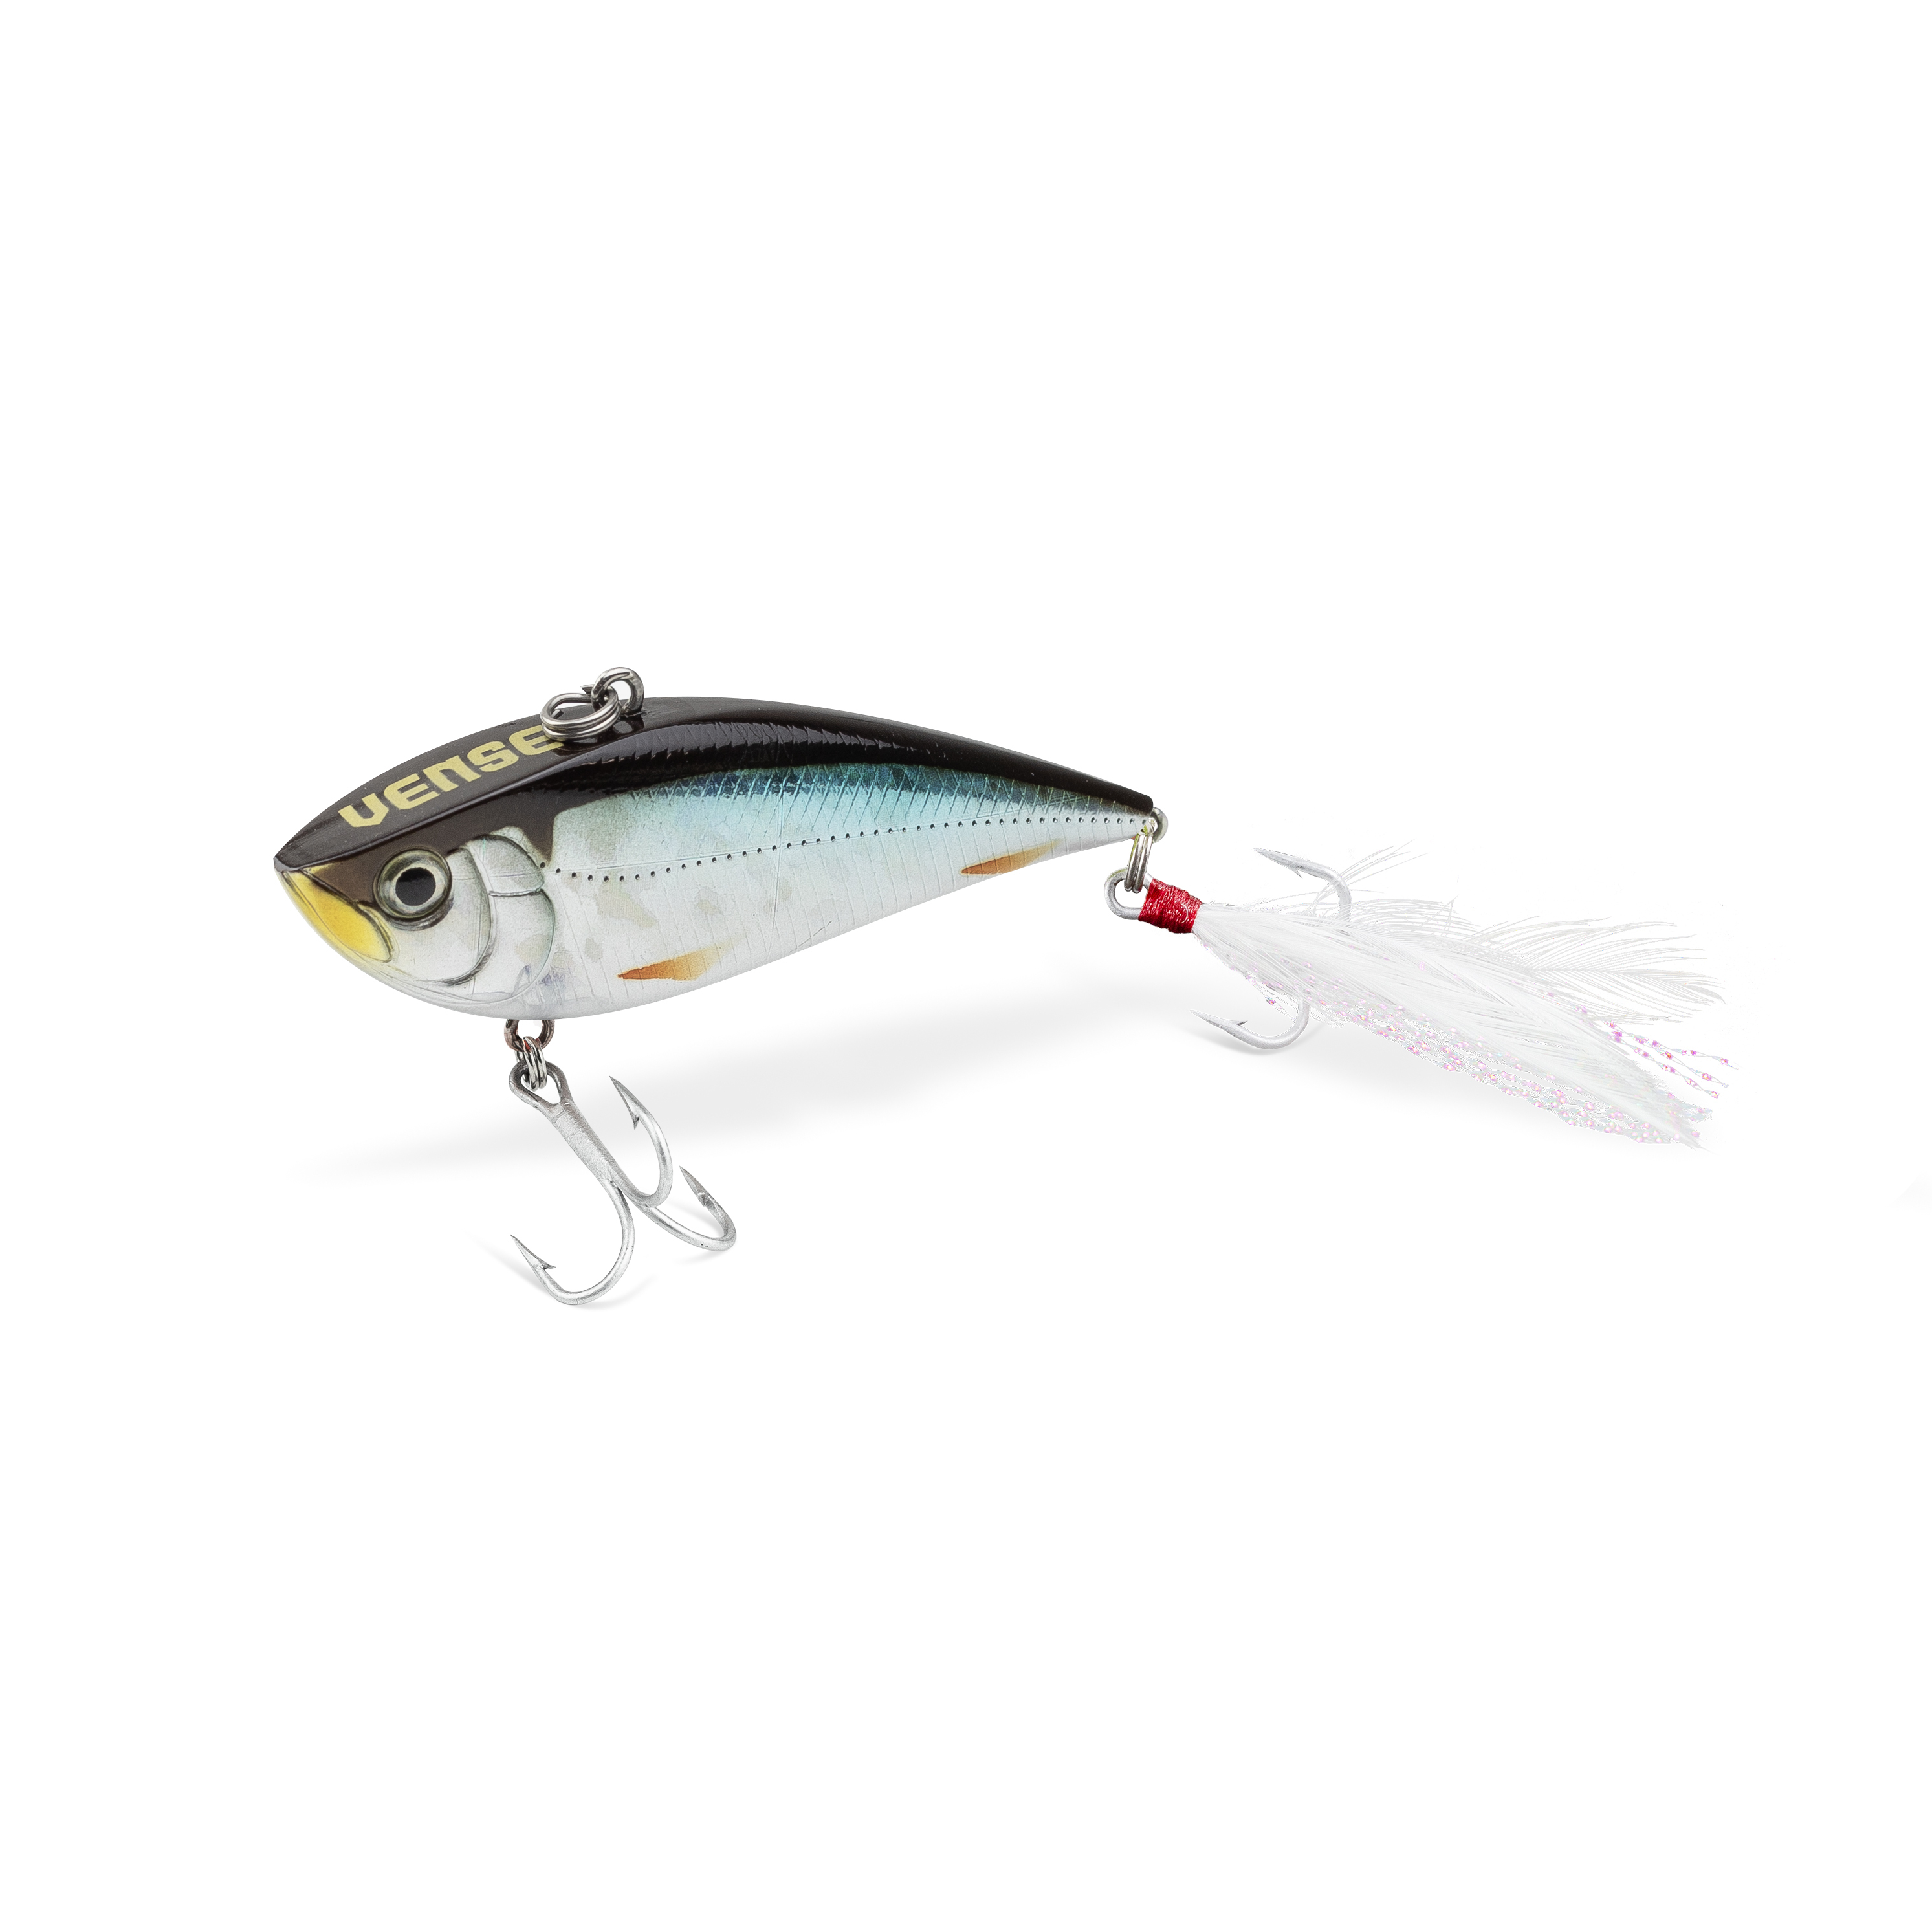 RM5 Solid Resin Abalone Inch UV Minnow Lure, Fish Craft Lures